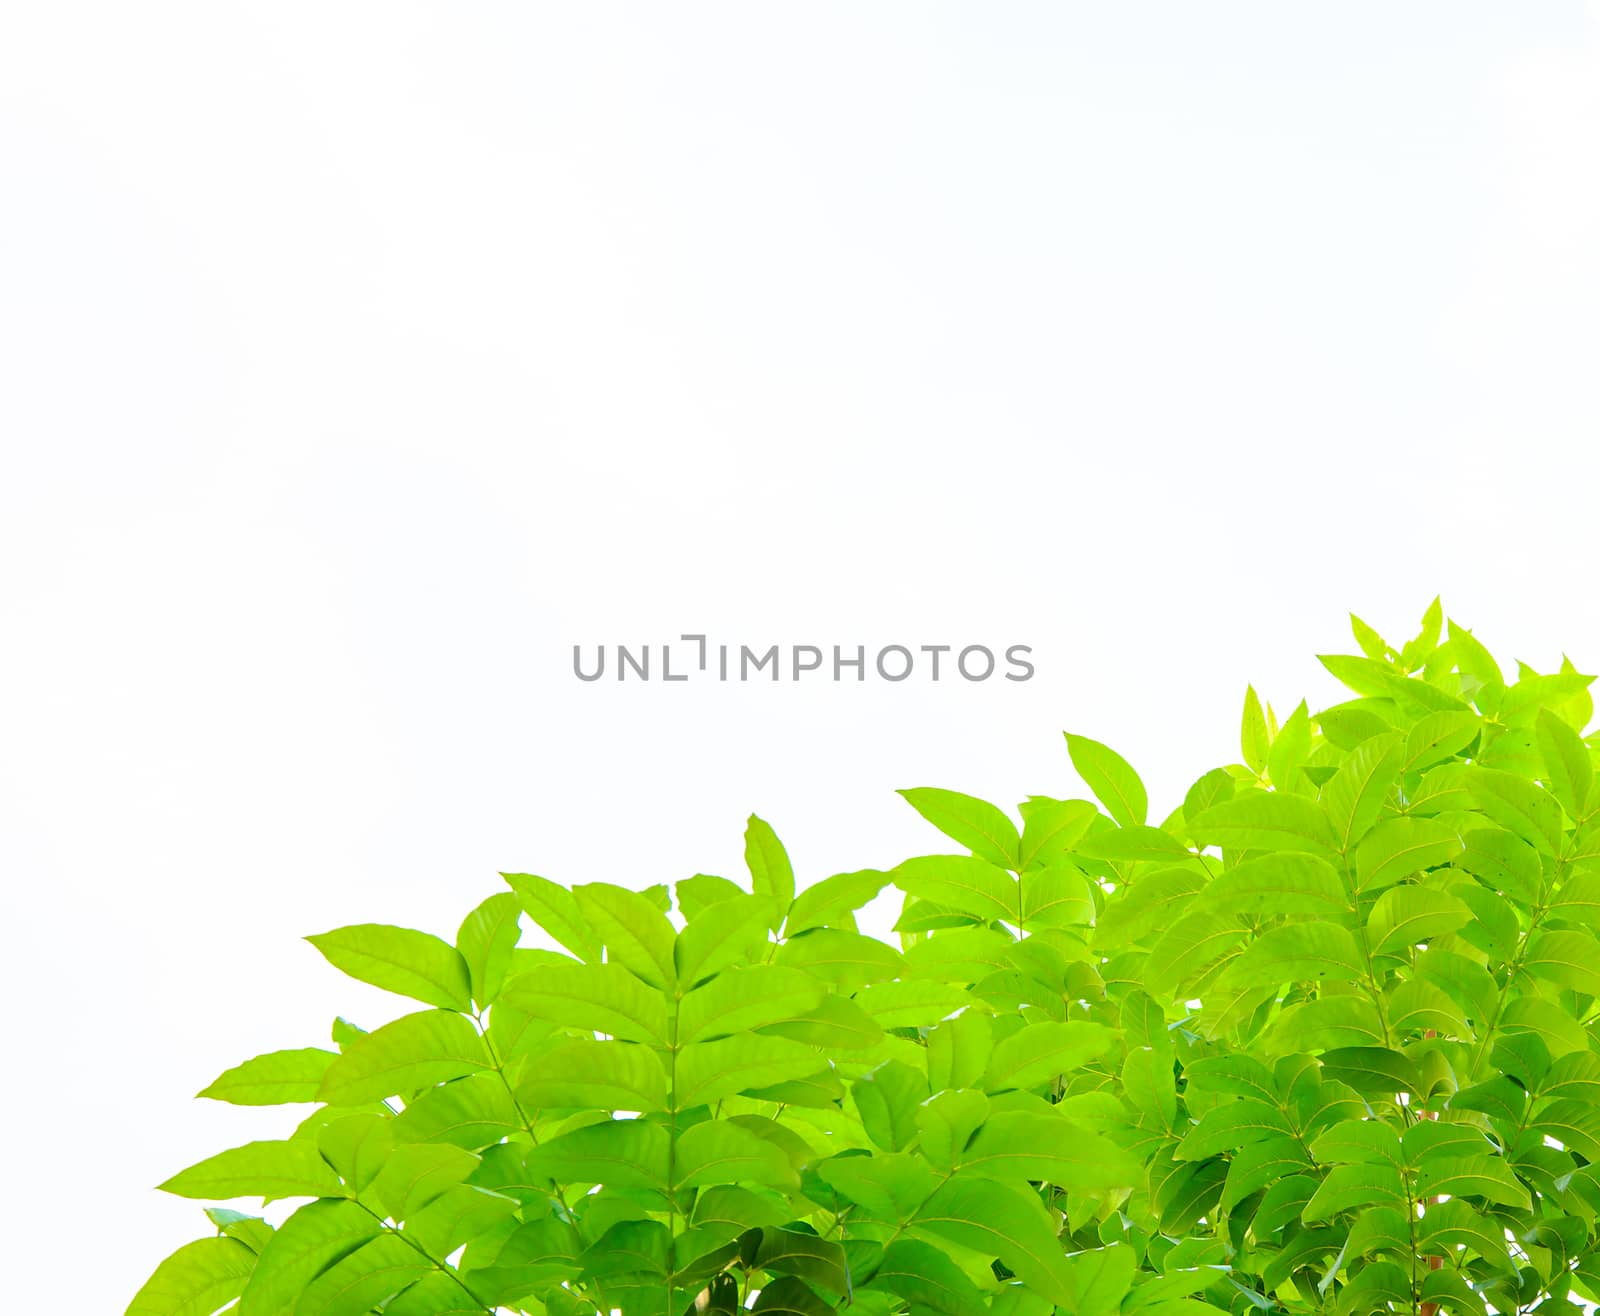 The green leaves isolated on white background.